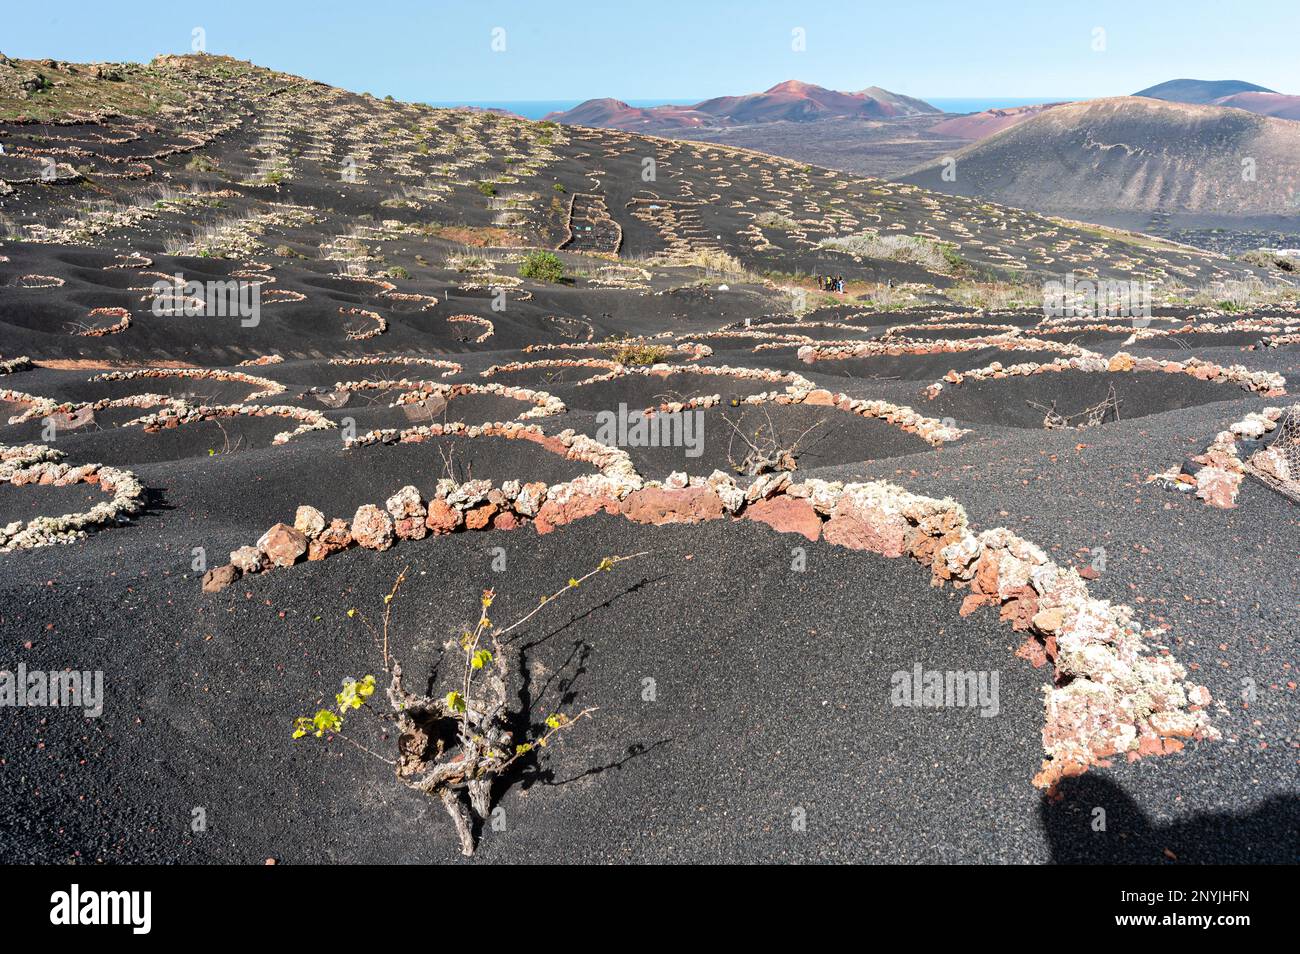 Stunning perspective of vineyard on black volcanic soil at La garia, Lanzarote Canary islands featuring Vines in pits protected by rocky windbreaks Stock Photo